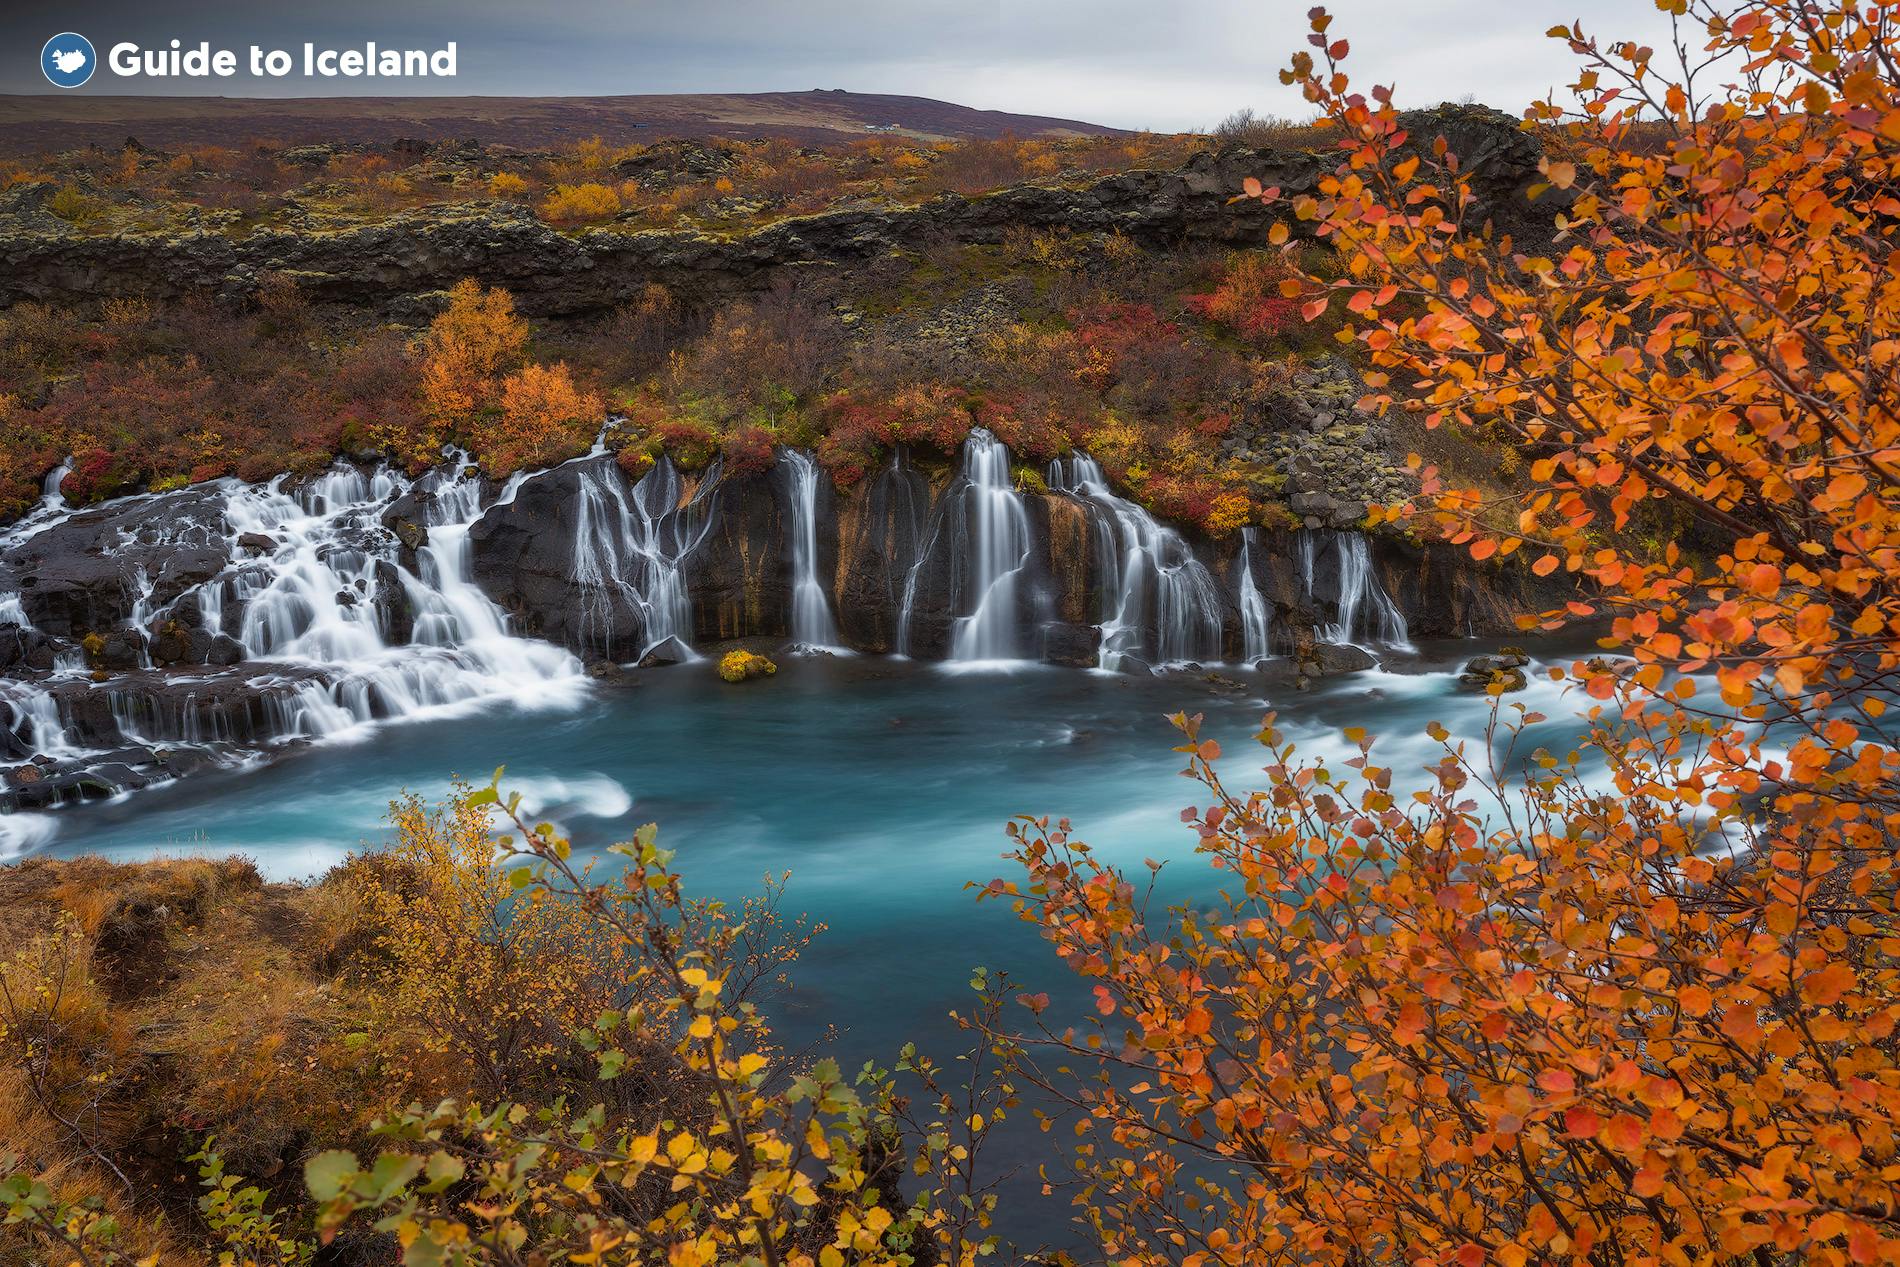 Hraunfossar waterfall is located in West Iceland